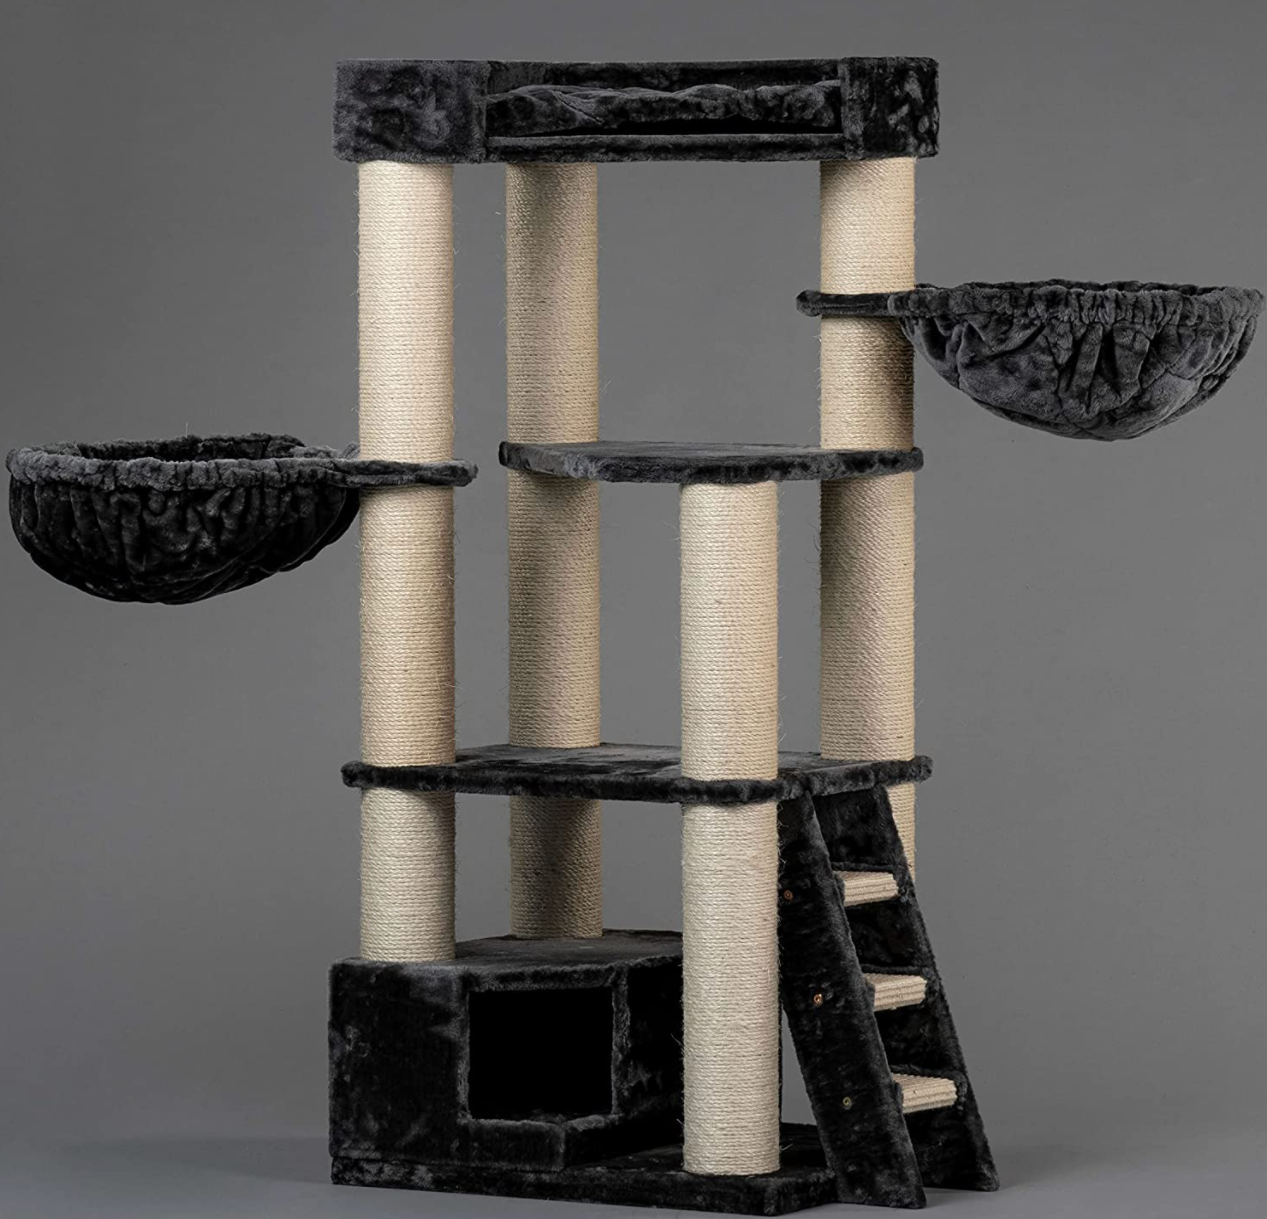 RHRQuality cat tree is one of the best cat trees for large cats UK